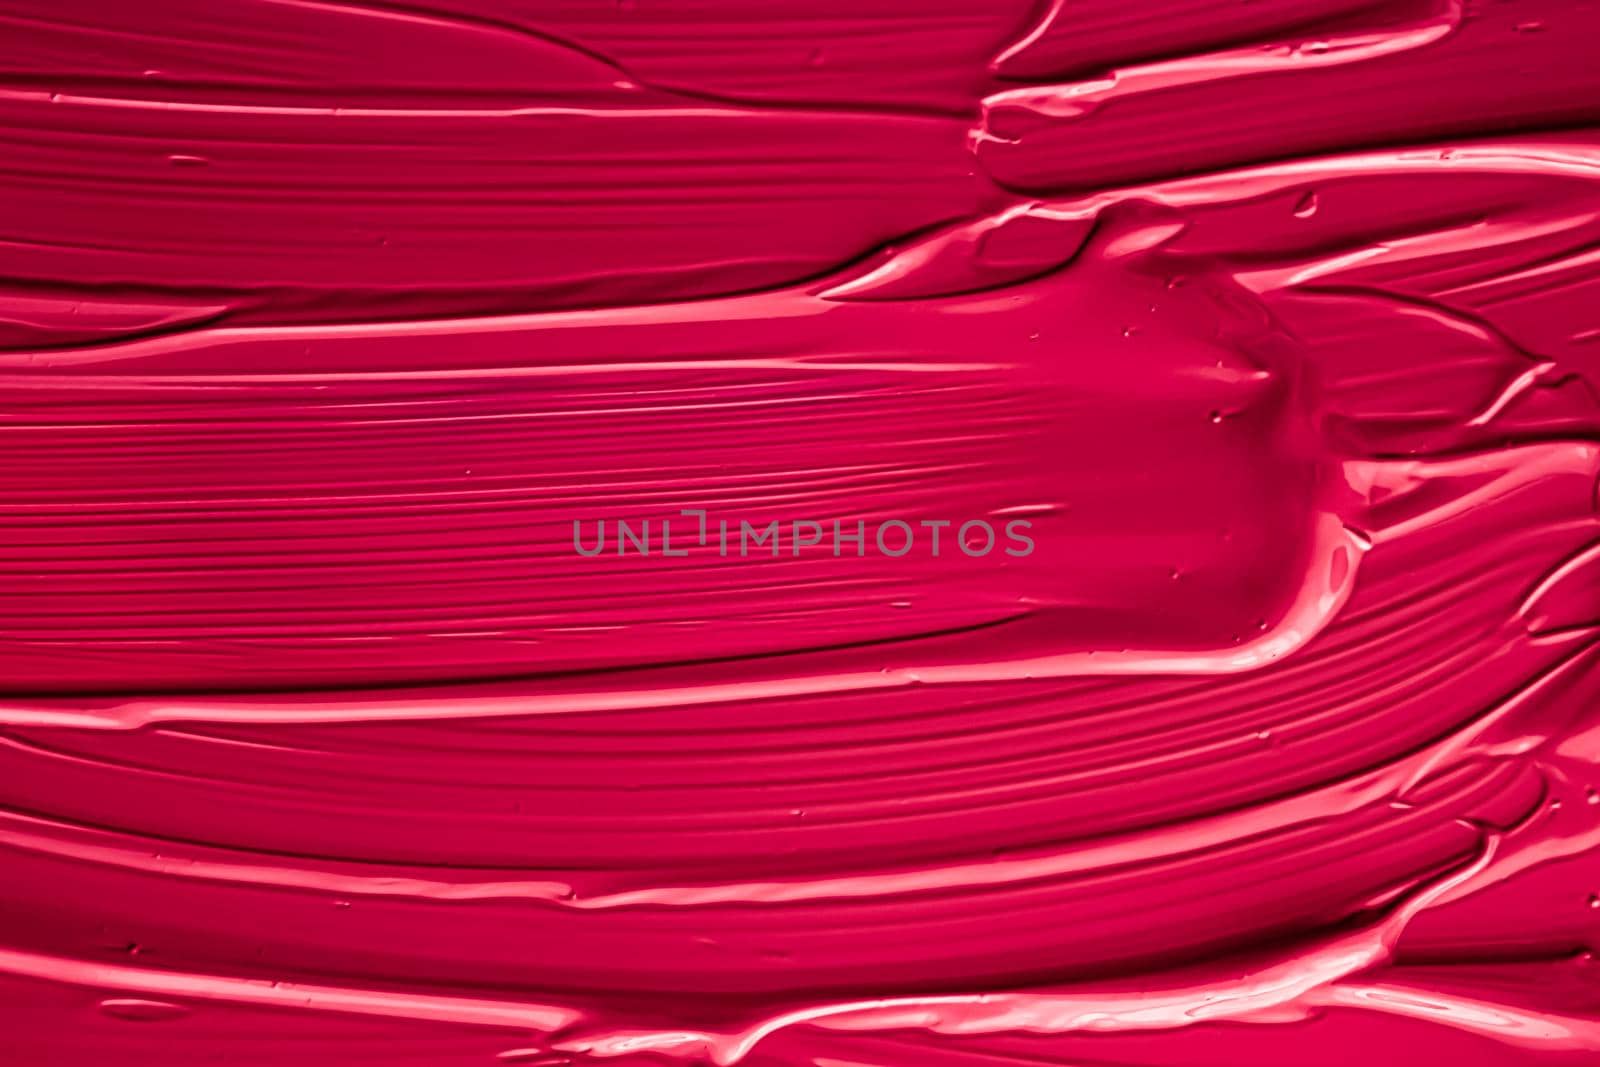 Red lipstick or lip gloss texture as cosmetic background, makeup and beauty cosmetics product for luxury brand, holiday flatlay backdrop or abstract wall art and paint strokes.